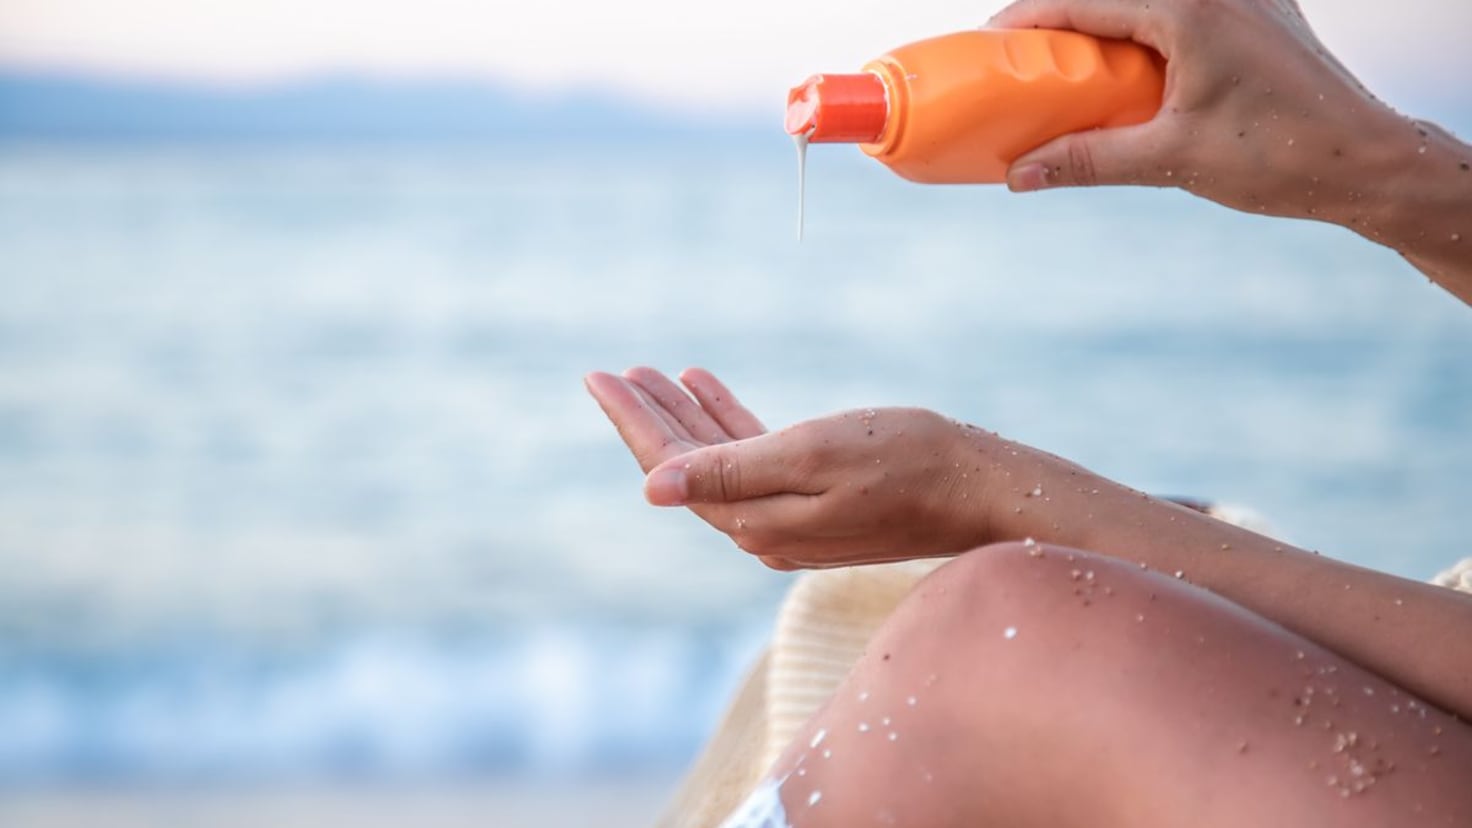 The Government studies giving free sunscreen
